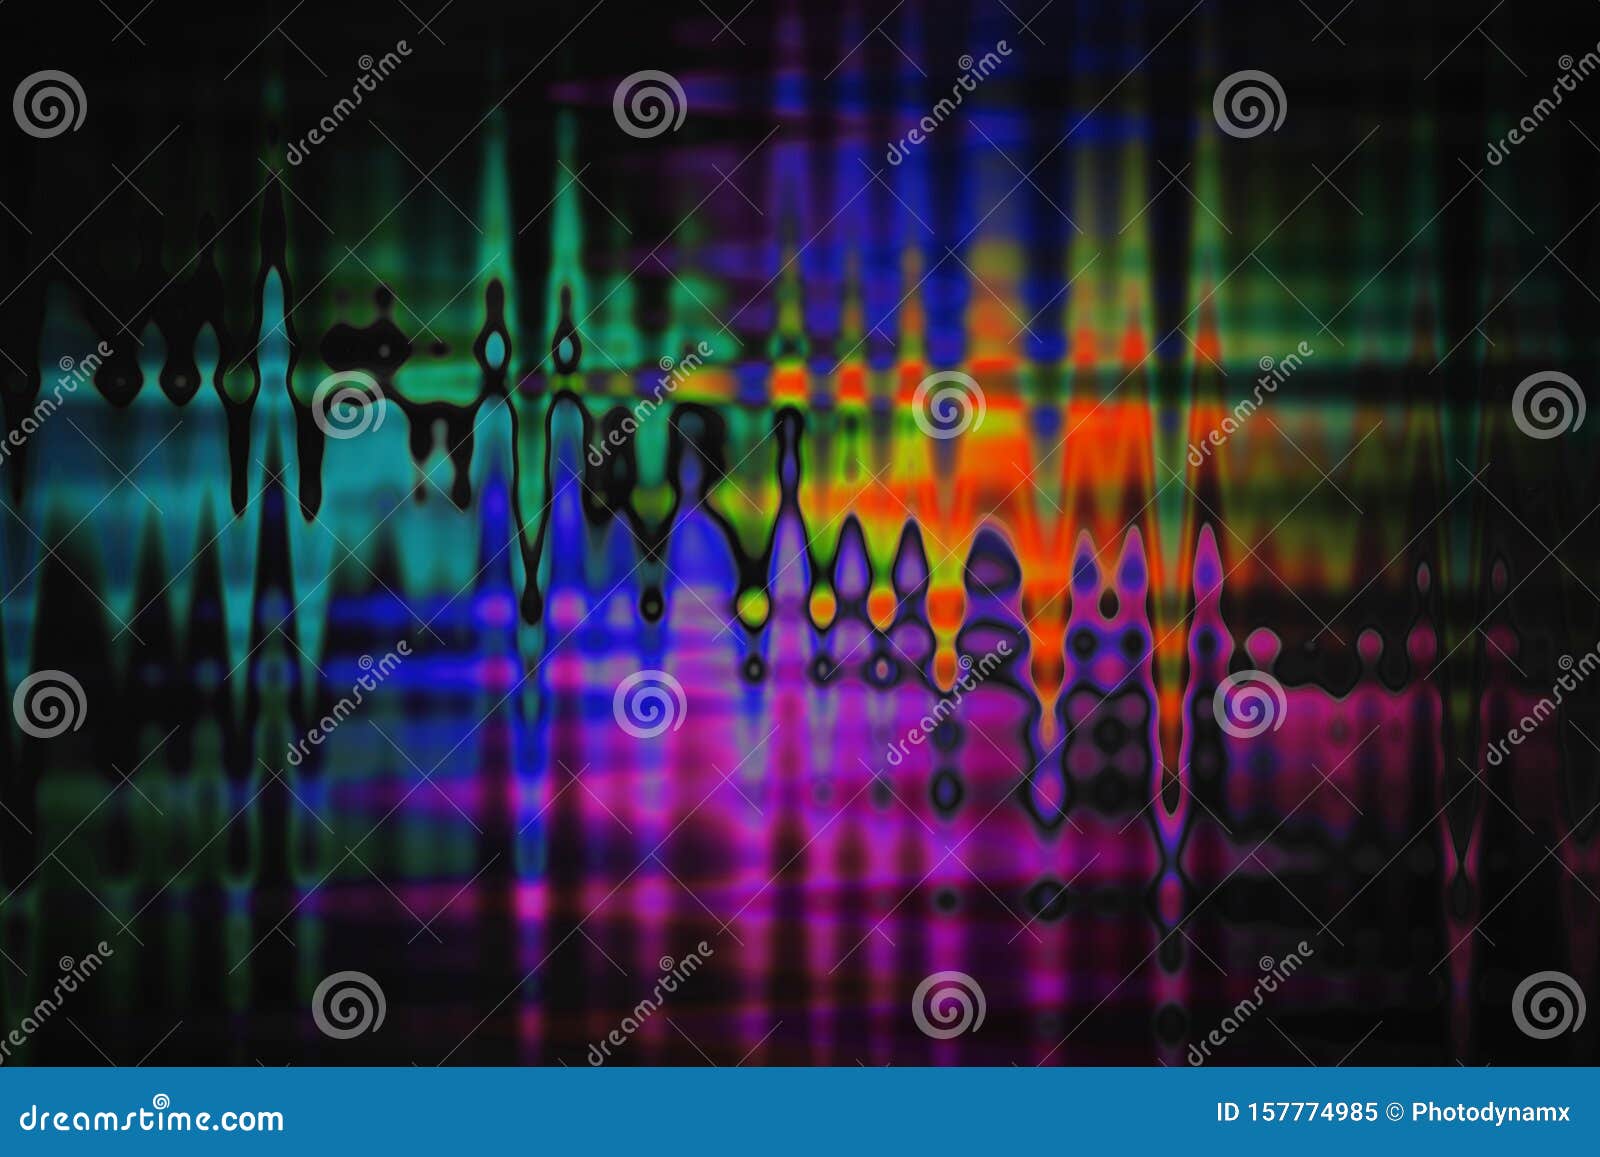 Background Wallpaper Screensaver Image Colour Grid Fabric Sonic  Interference Wave Wavelength Sound Stock Illustration - Illustration of  color, card: 157774985